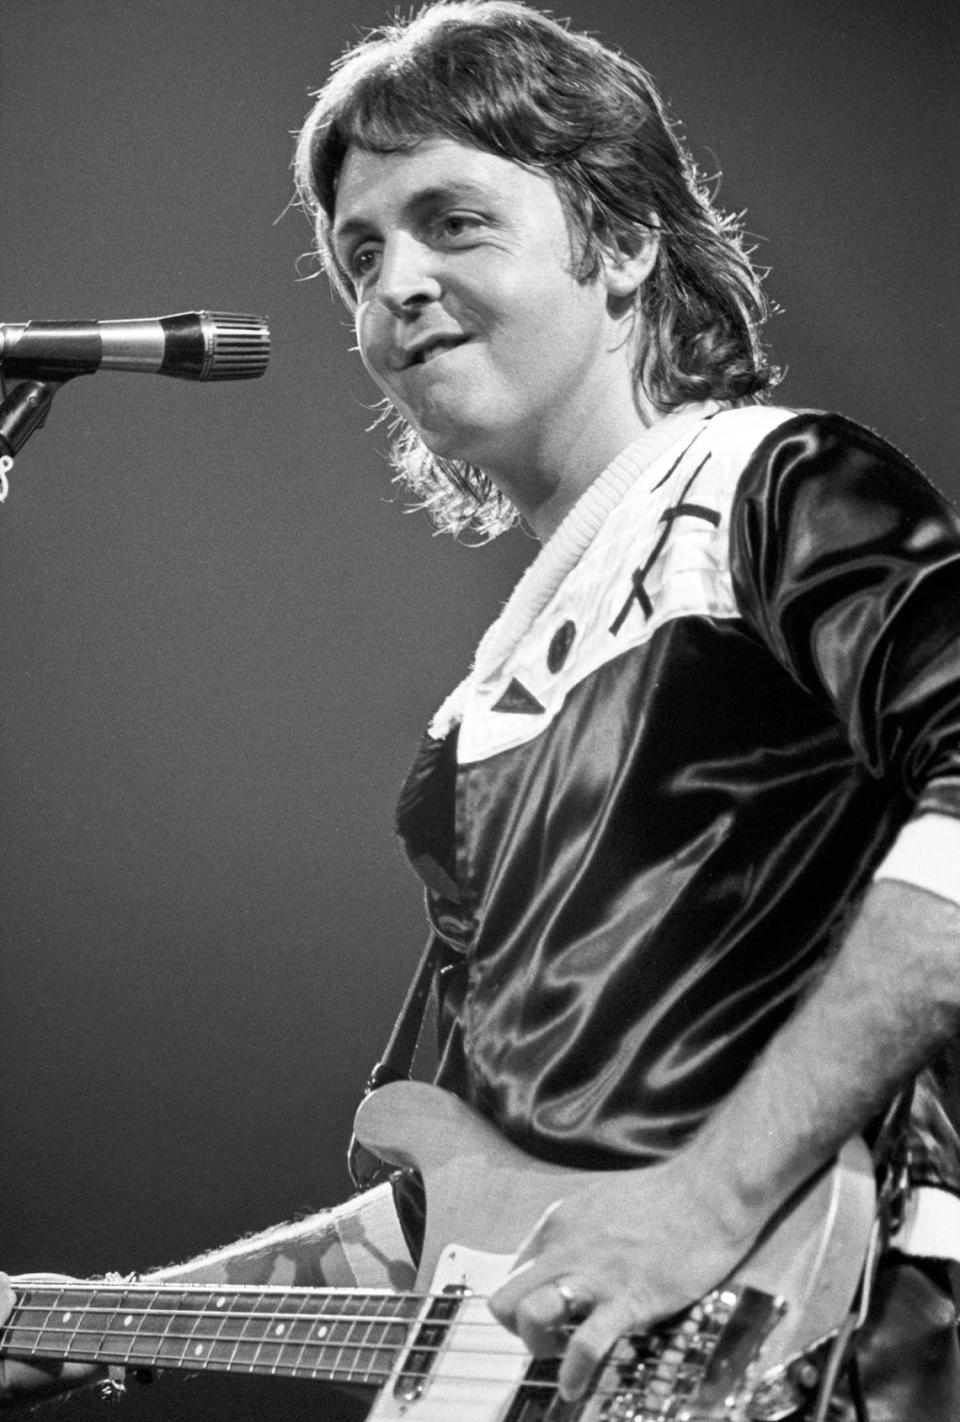 Paul McCartney and Wings opened their first United States tour, “Wings Over America,” at the Tarrant County Convention Center, attracting a packed house which was sold out two months before the show. The ex-Beatle, Paul McCartney, is seen here performing on stage during the concert; 05/03/1976.